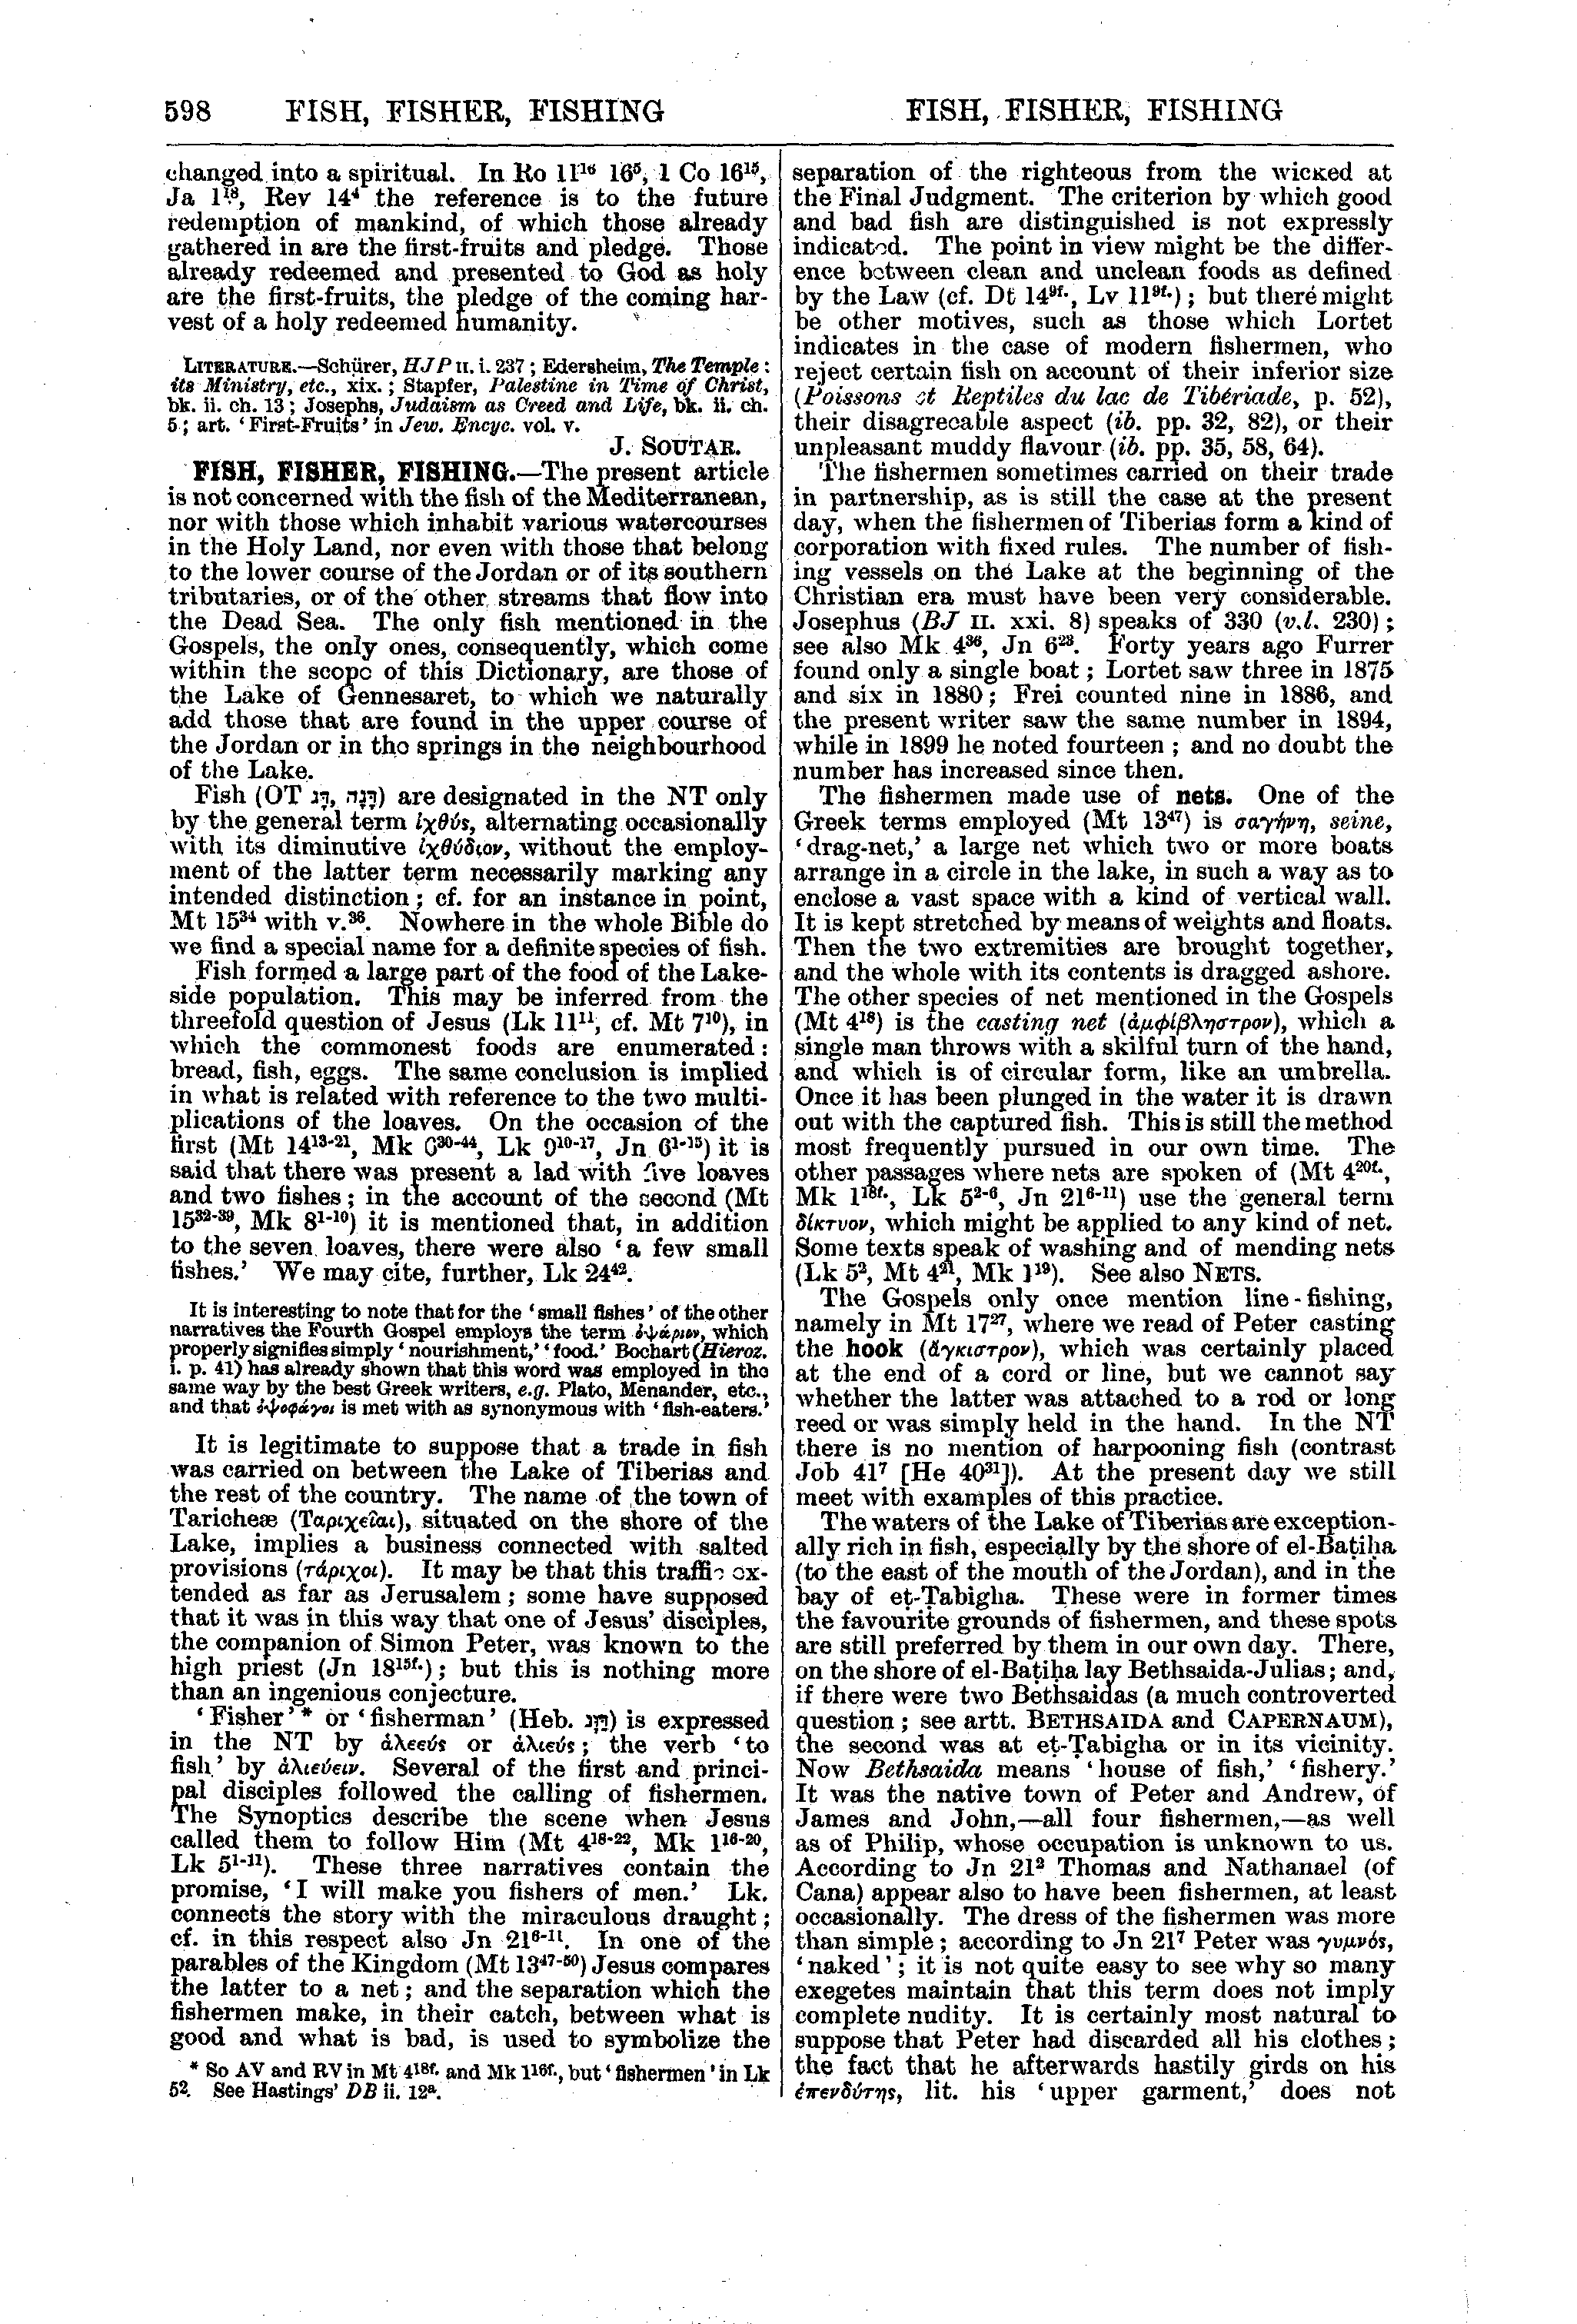 Image of page 598